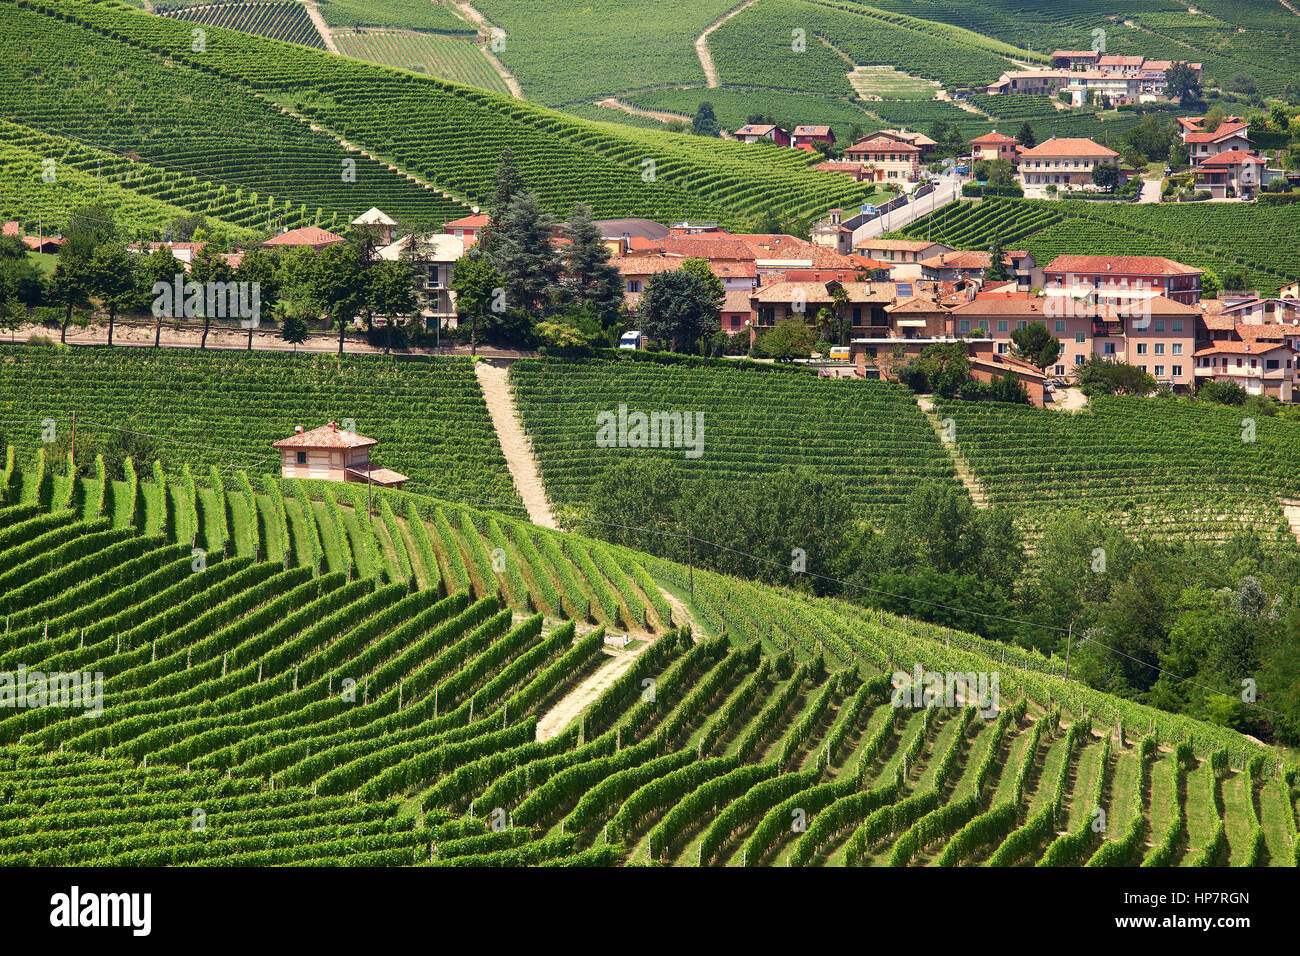 Small town among hills and green vineyards of Piedmont, Northern Italy. Stock Photo